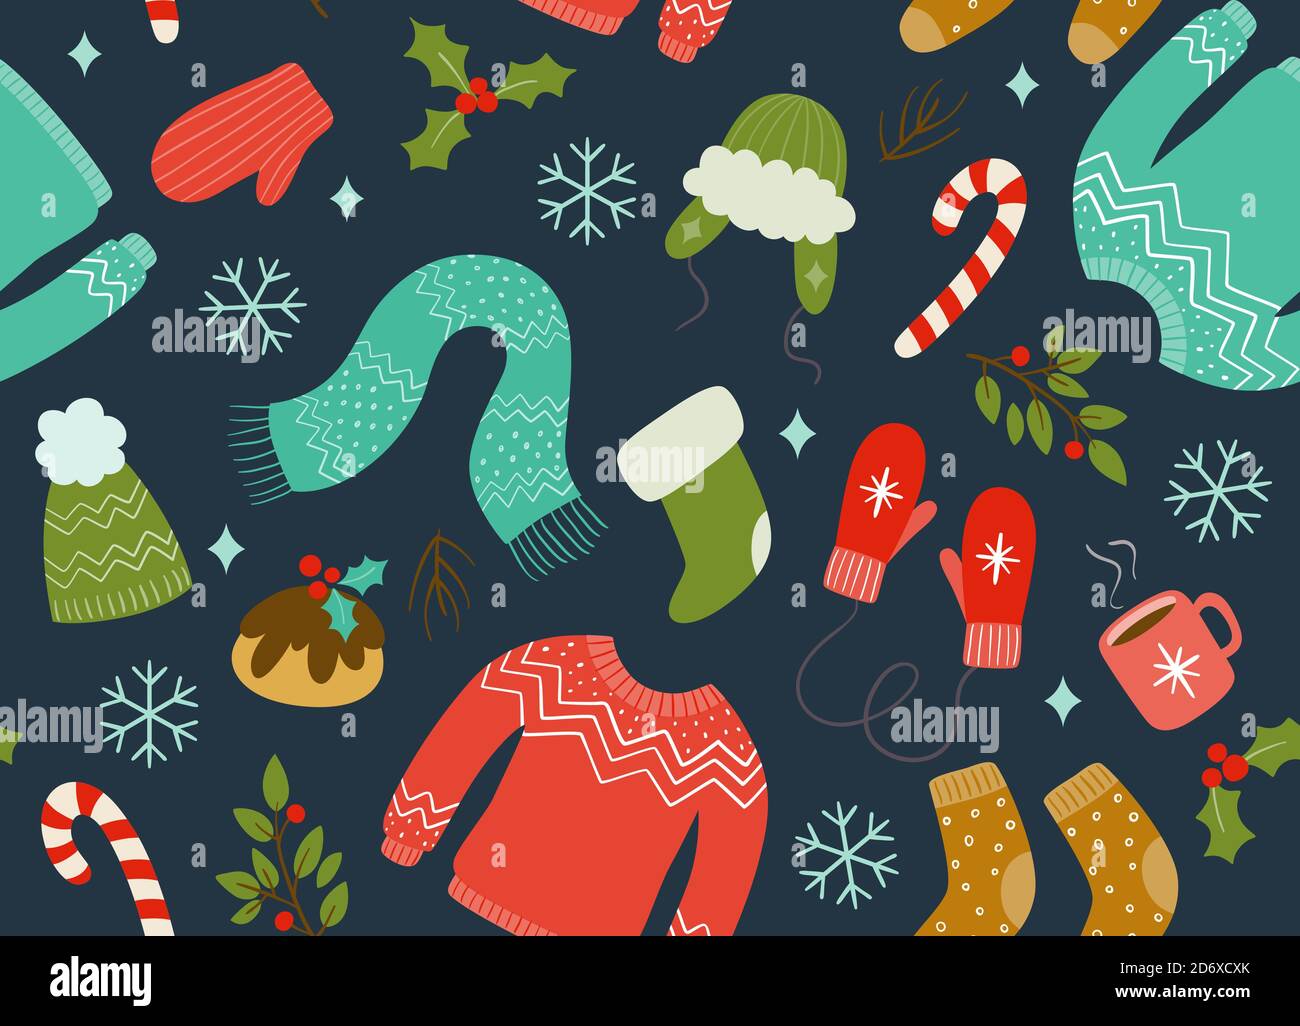 https://c8.alamy.com/comp/2D6XCXK/christmas-seamless-pattern-with-winter-clothes-and-accessories-dark-blue-background-keep-warm-concept-eps-10-vector-illustration-2D6XCXK.jpg